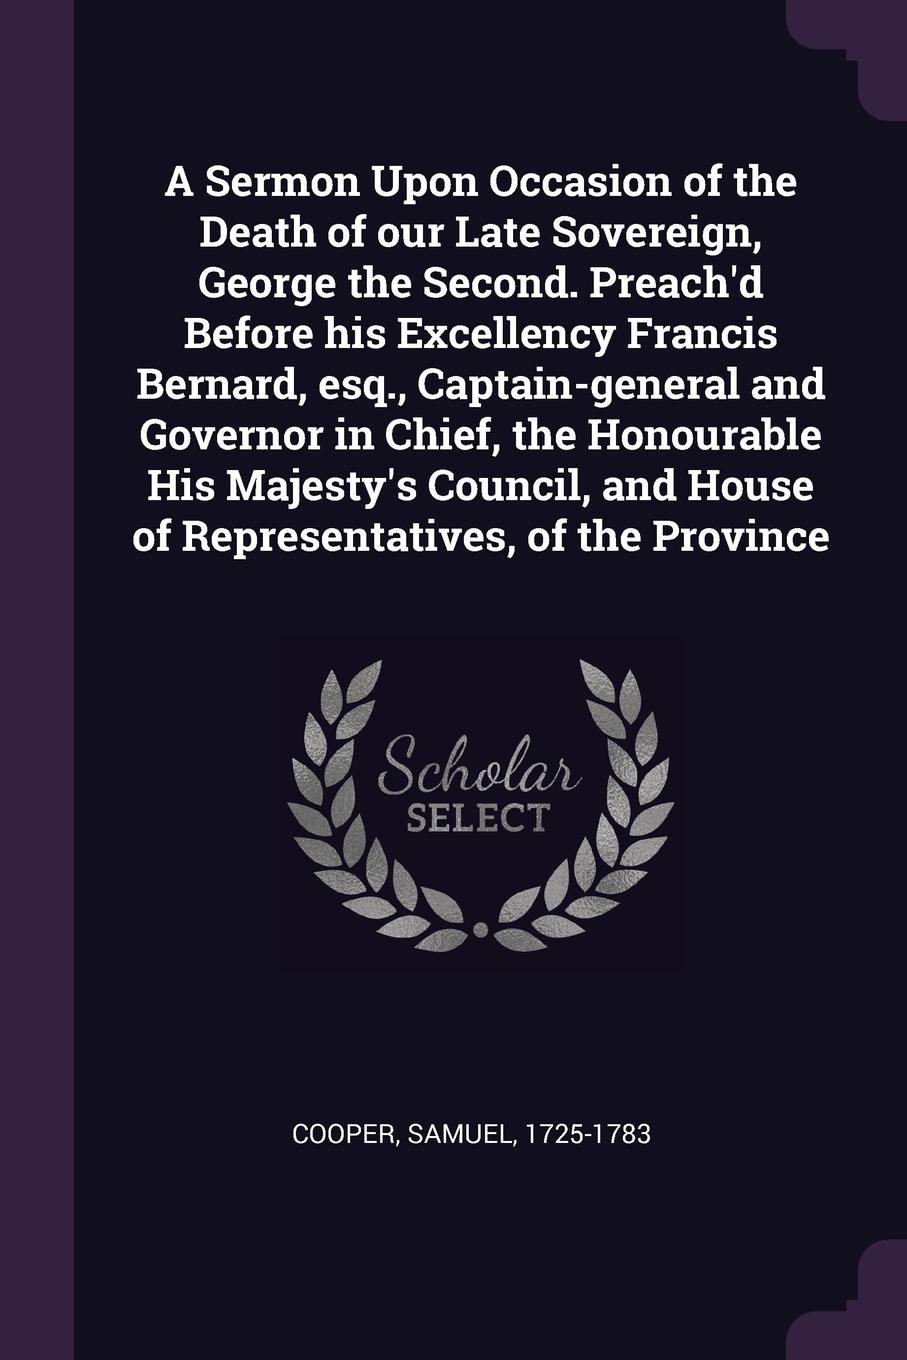 A Sermon Upon Occasion of the Death of our Late Sovereign, George the Second. Preach`d Before his Excellency Francis Bernard, esq., Captain-general and Governor in Chief, the Honourable His Majesty`s Council, and House of Representatives, of the P...